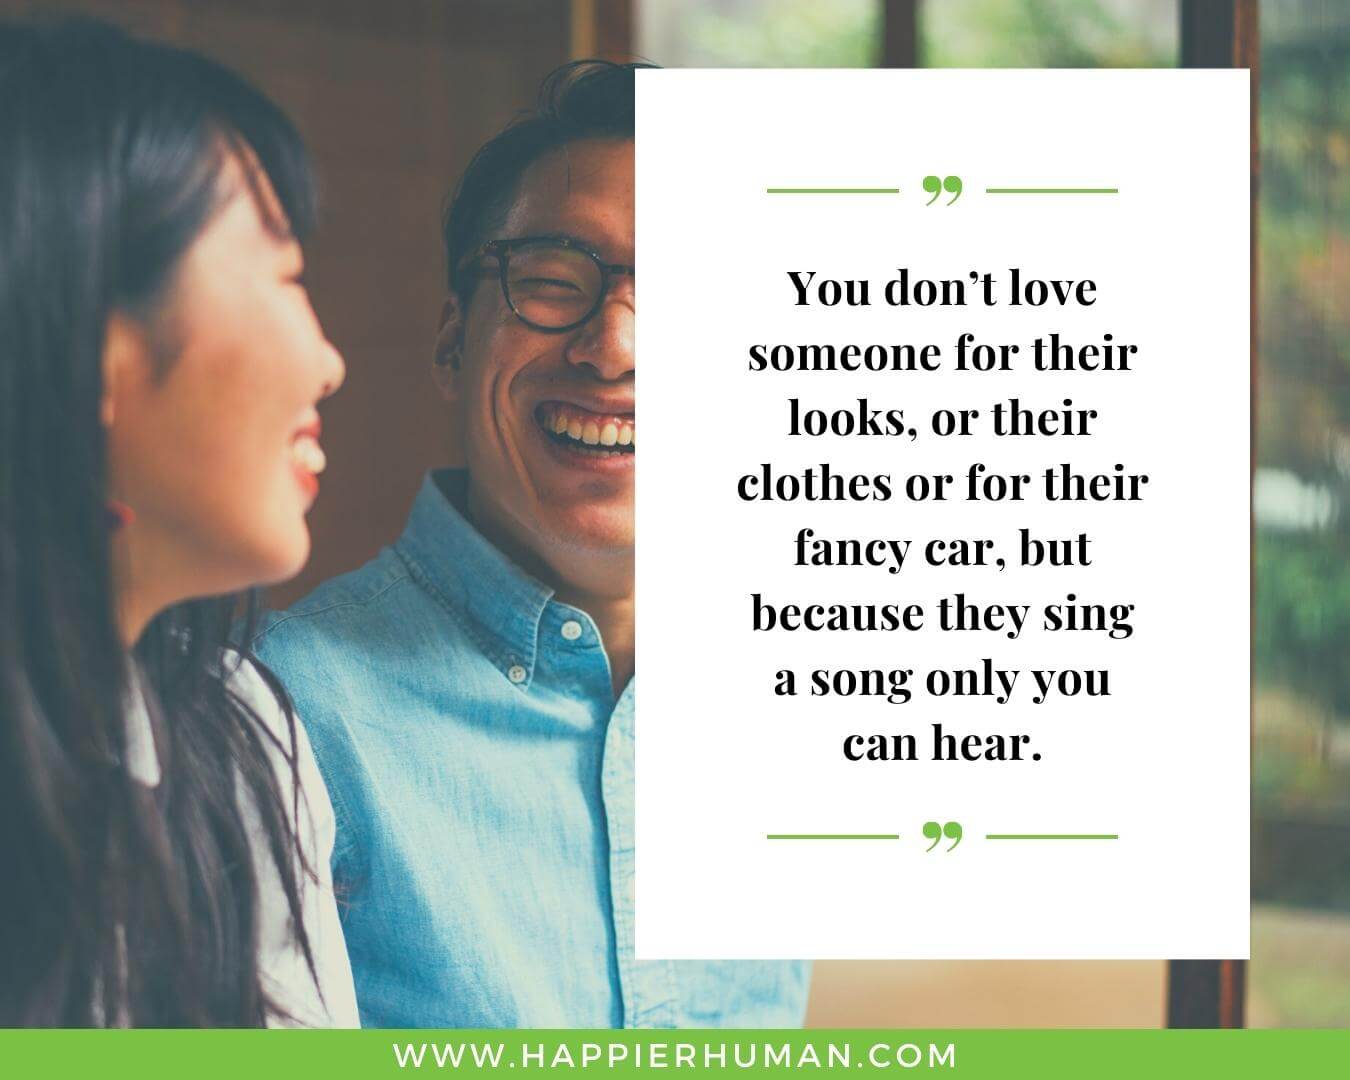 Unconditional Love Quotes for Her - “You don’t love someone for their looks, or their clothes or for their fancy car, but because they sing a song only you can hear.”